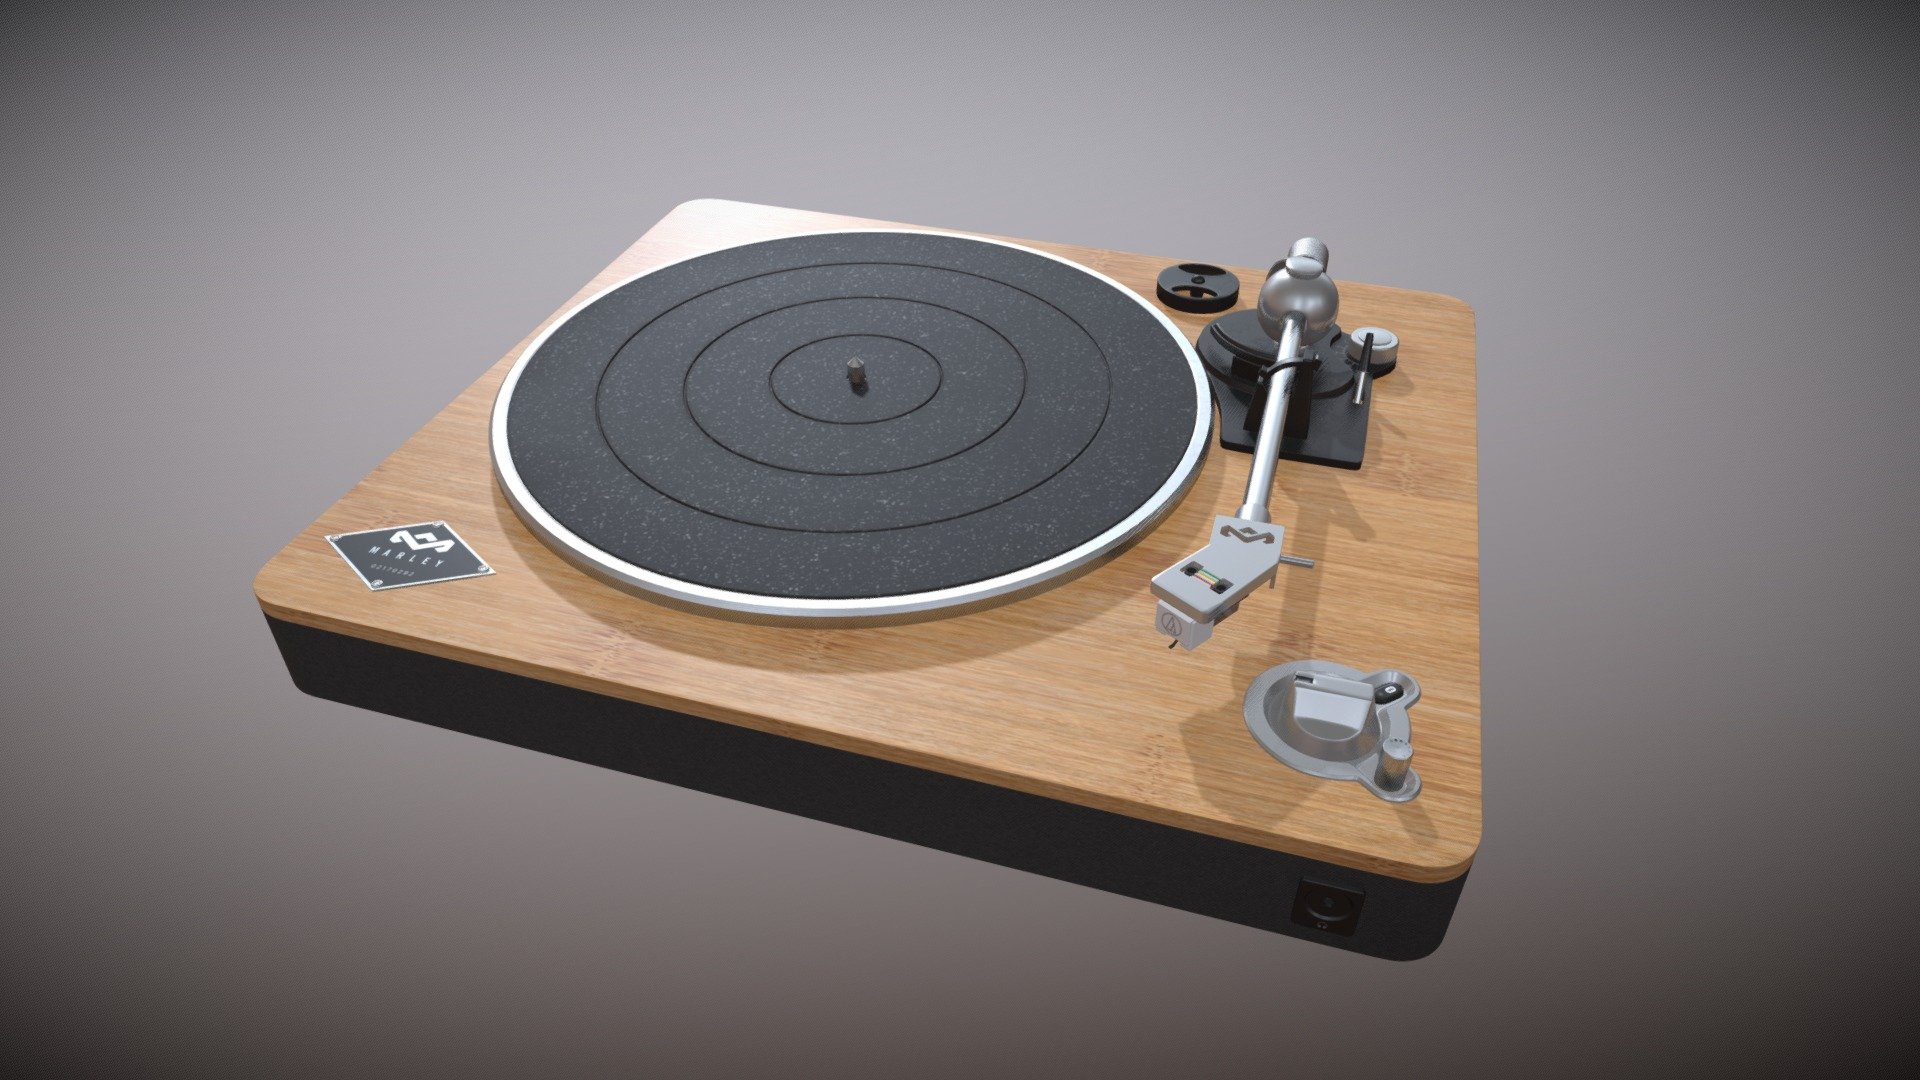 House of Marley - Stir it Up - Record Player

CG model with 110k polycount. Excellent edge-support for sub-divisions. 
Single 4k texture set with diffuse, metallic, roughness and normal maps 3d model